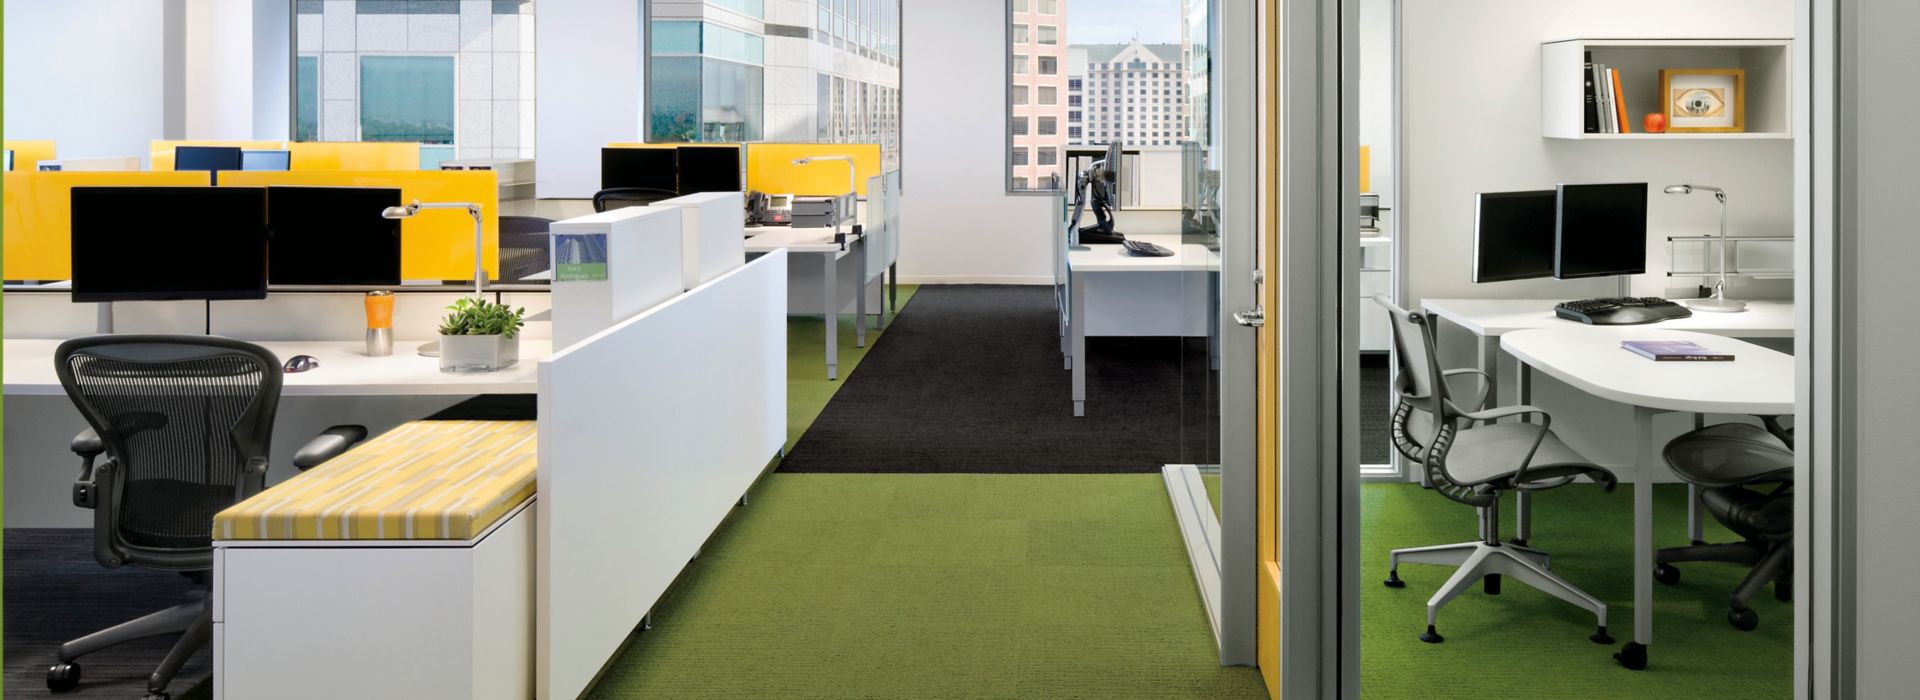 Interface Monochrome and Striation carpet tile in walkway of office with multiple open offices and a private office imagen número 1